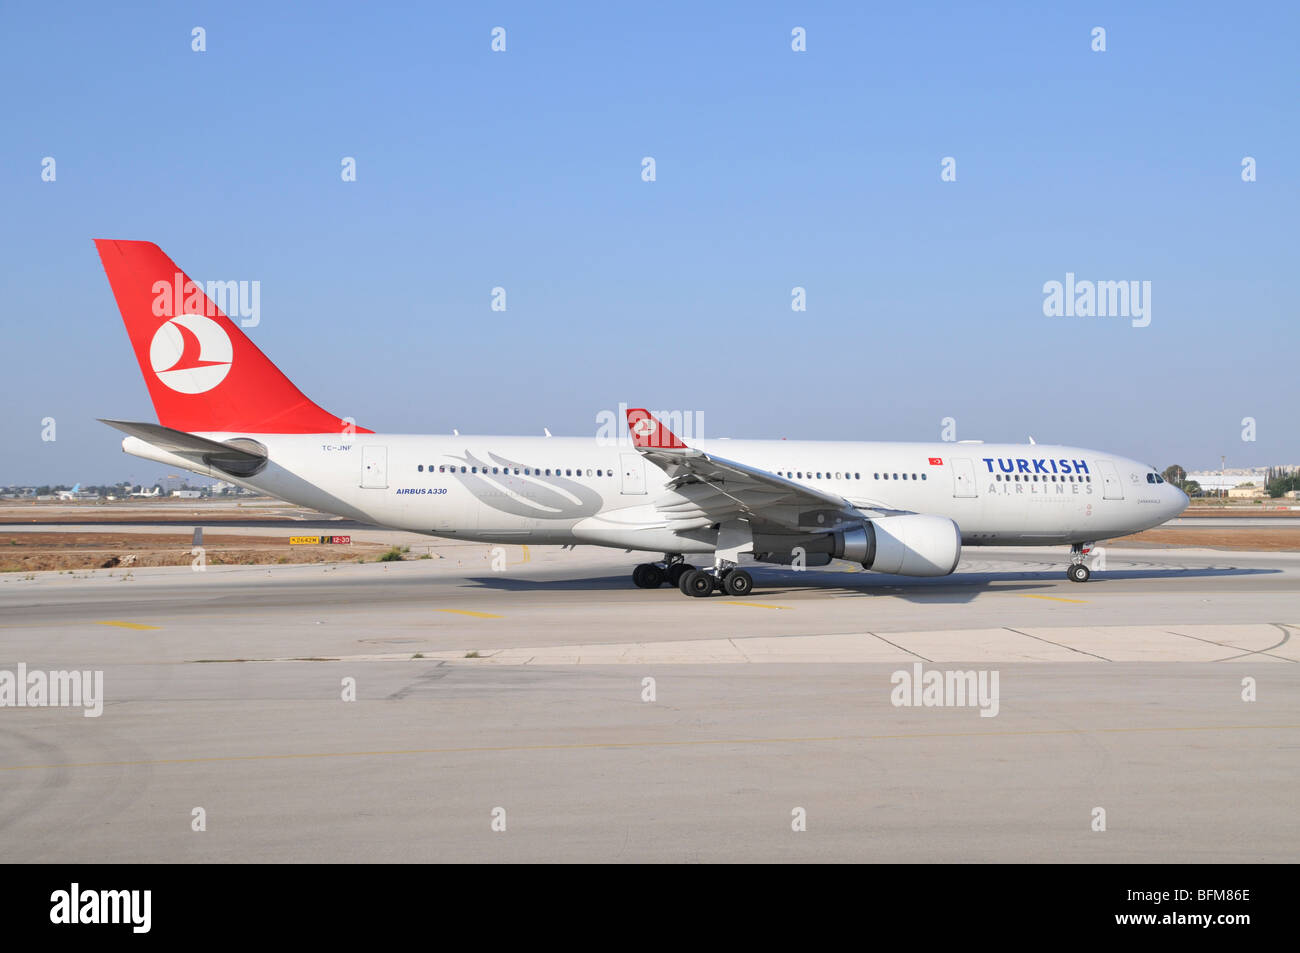 Israel, Ben-Gurion international Airport Turkish Airlines Airbus A330 passenger jet ready for takeoff Stock Photo